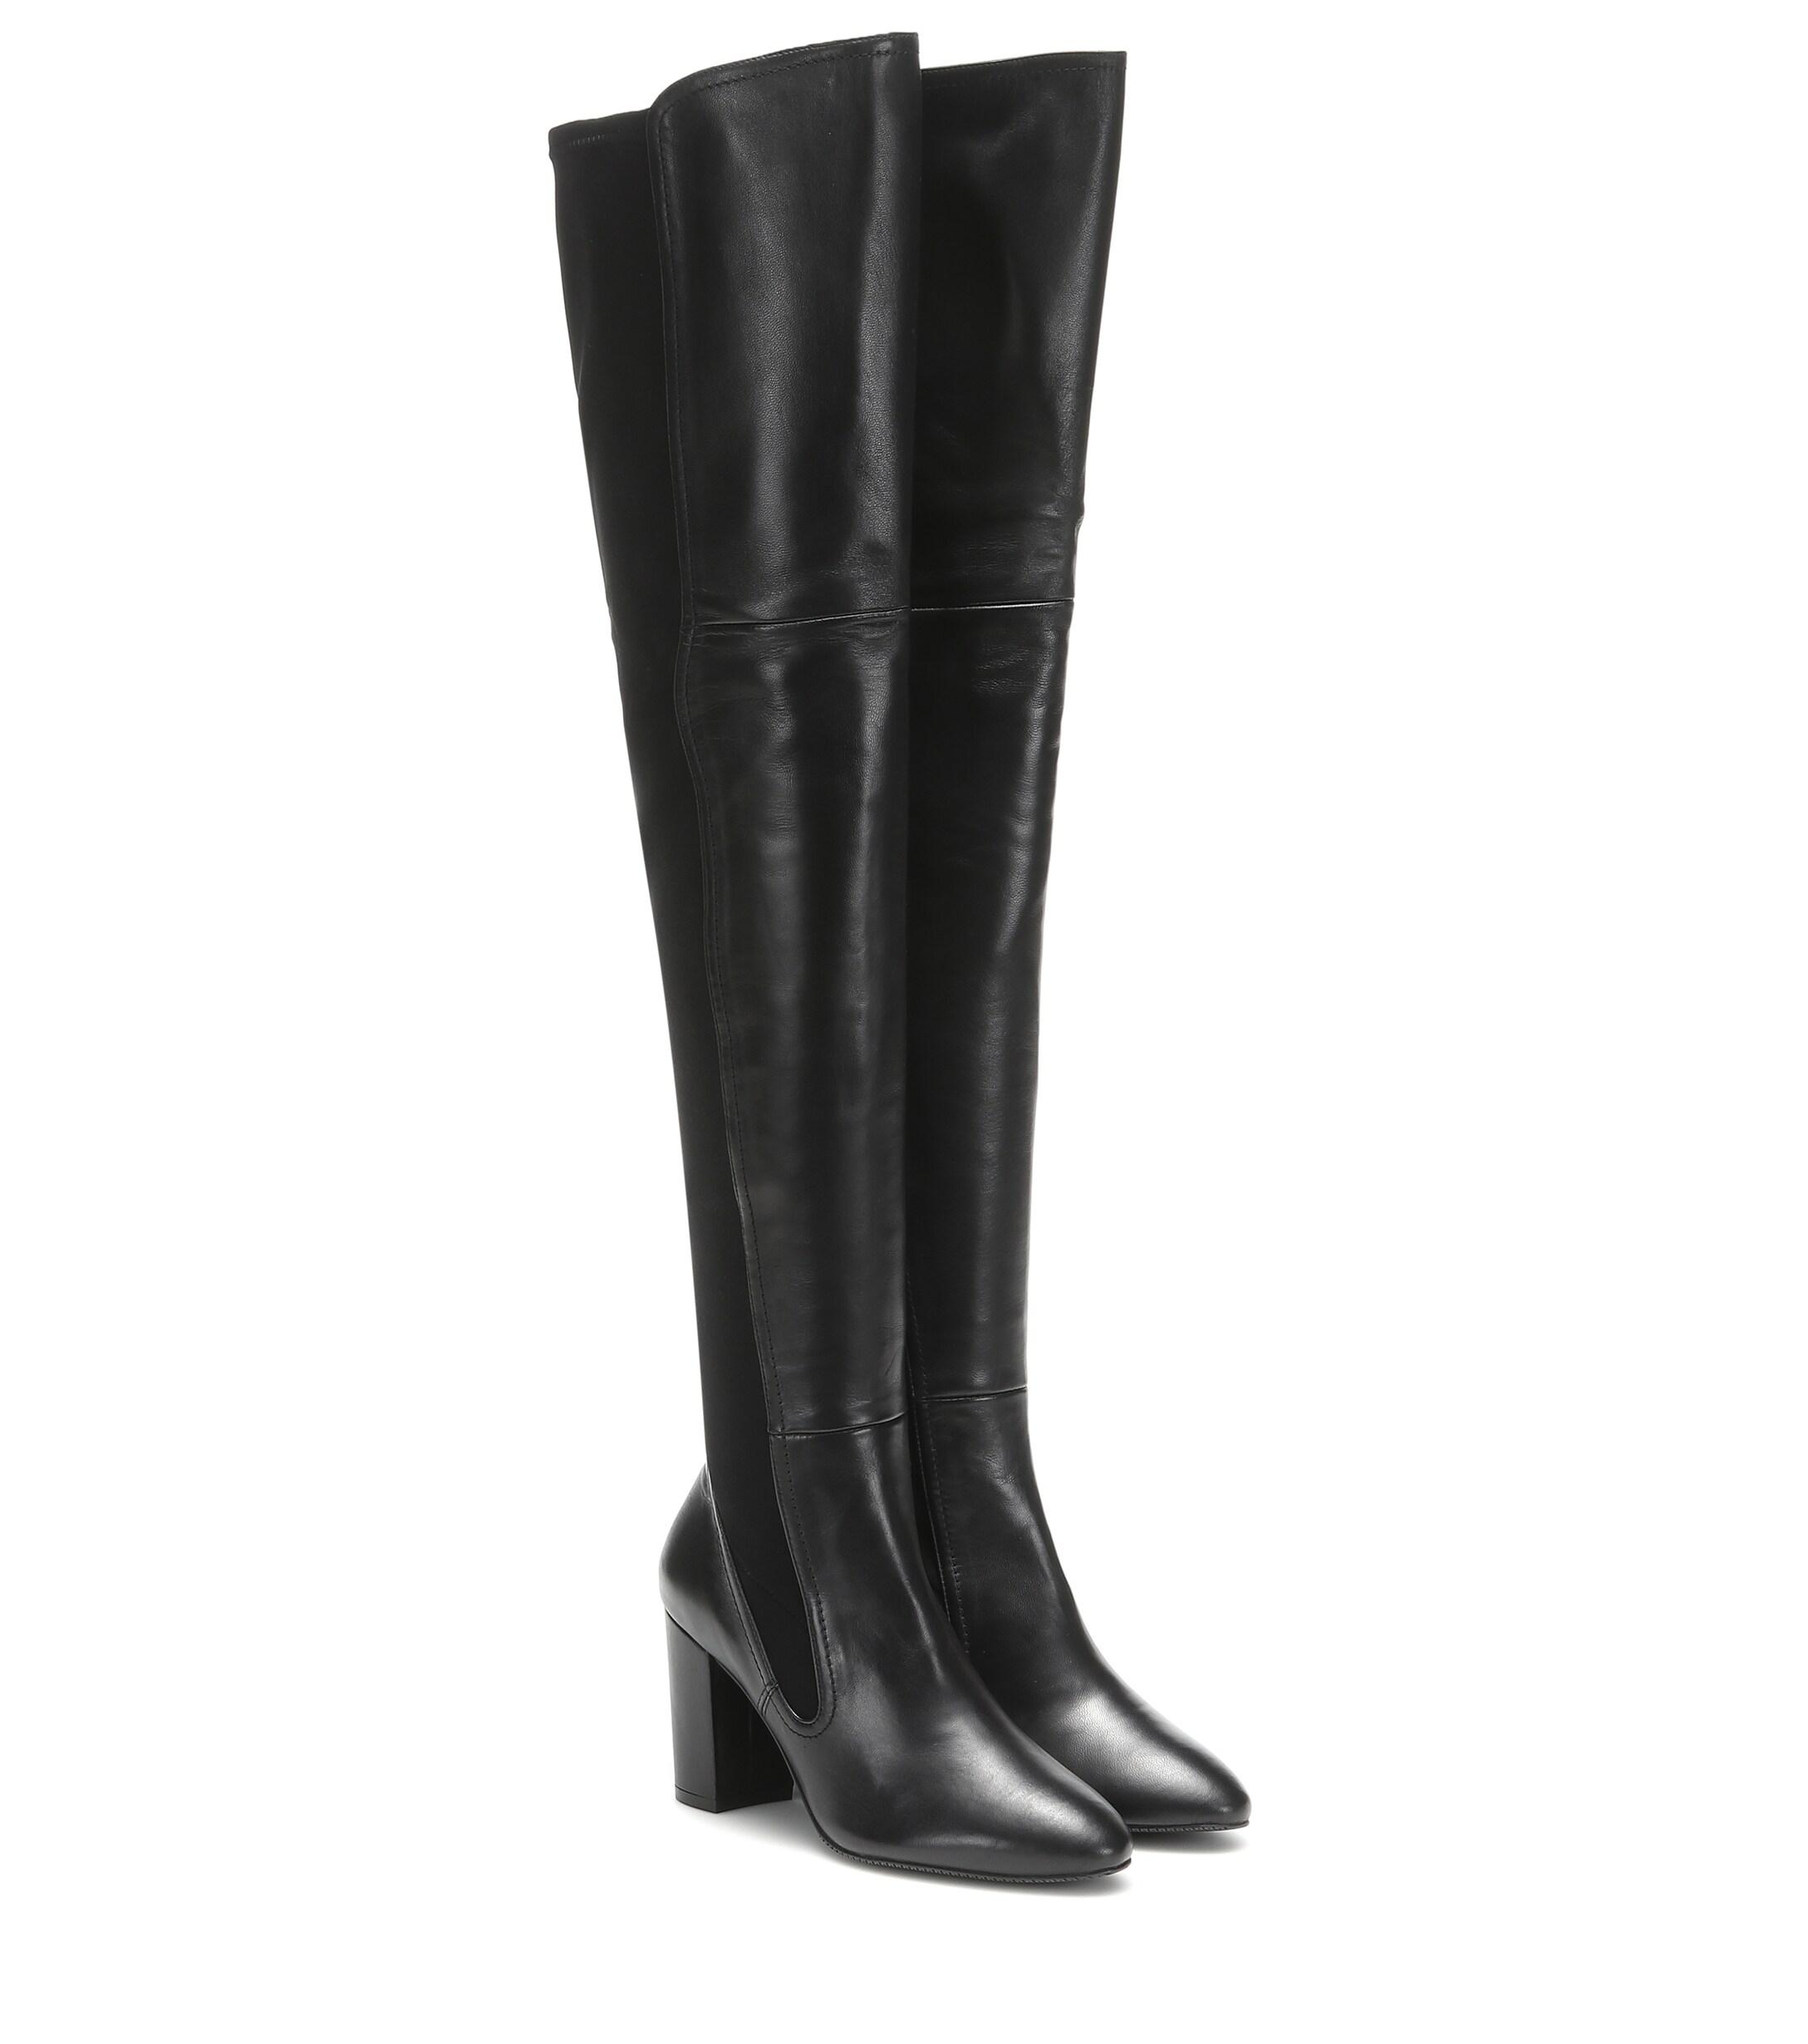 Stuart Weitzman Fleur Leather Over-the-knee Boots in Black - Lyst